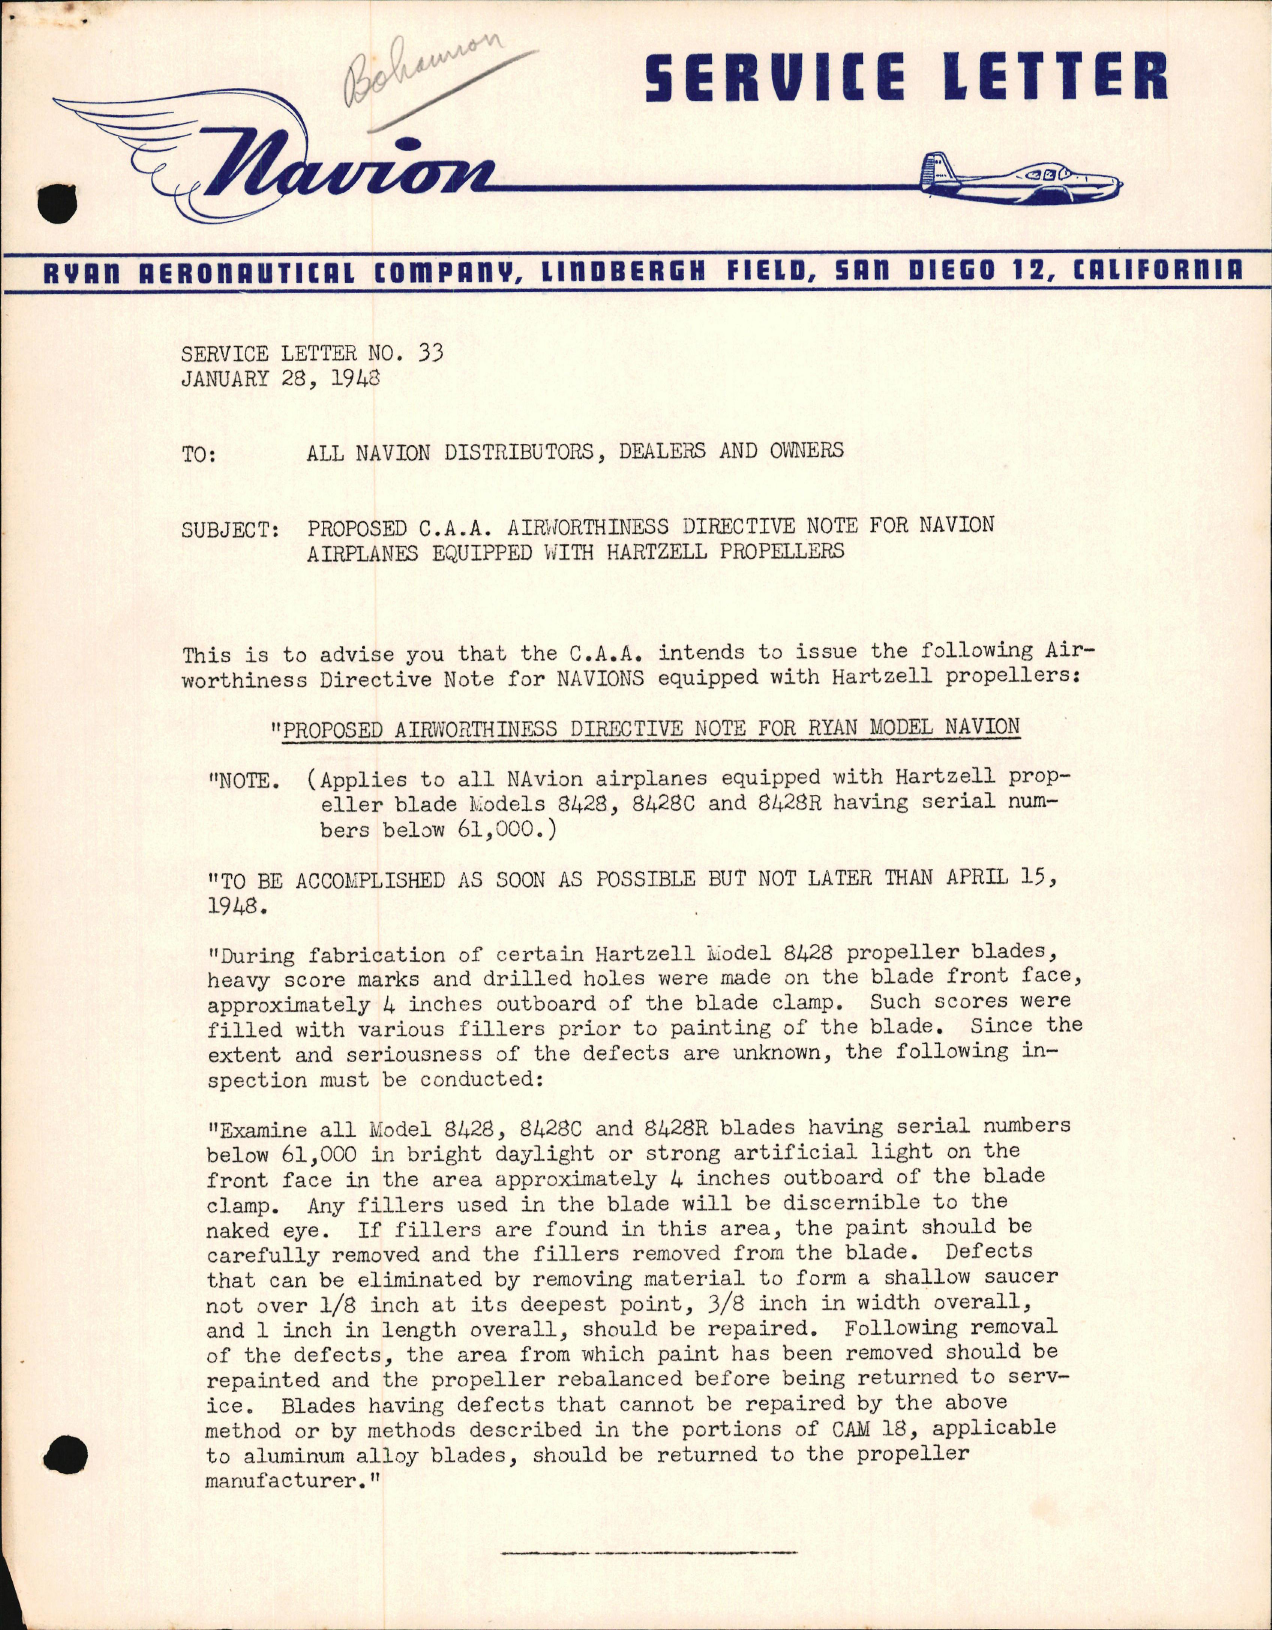 Sample page 1 from AirCorps Library document: Proposed C.A.A. Airworthiness Directive Note for Navion Eqipped with Hartzell Propellers